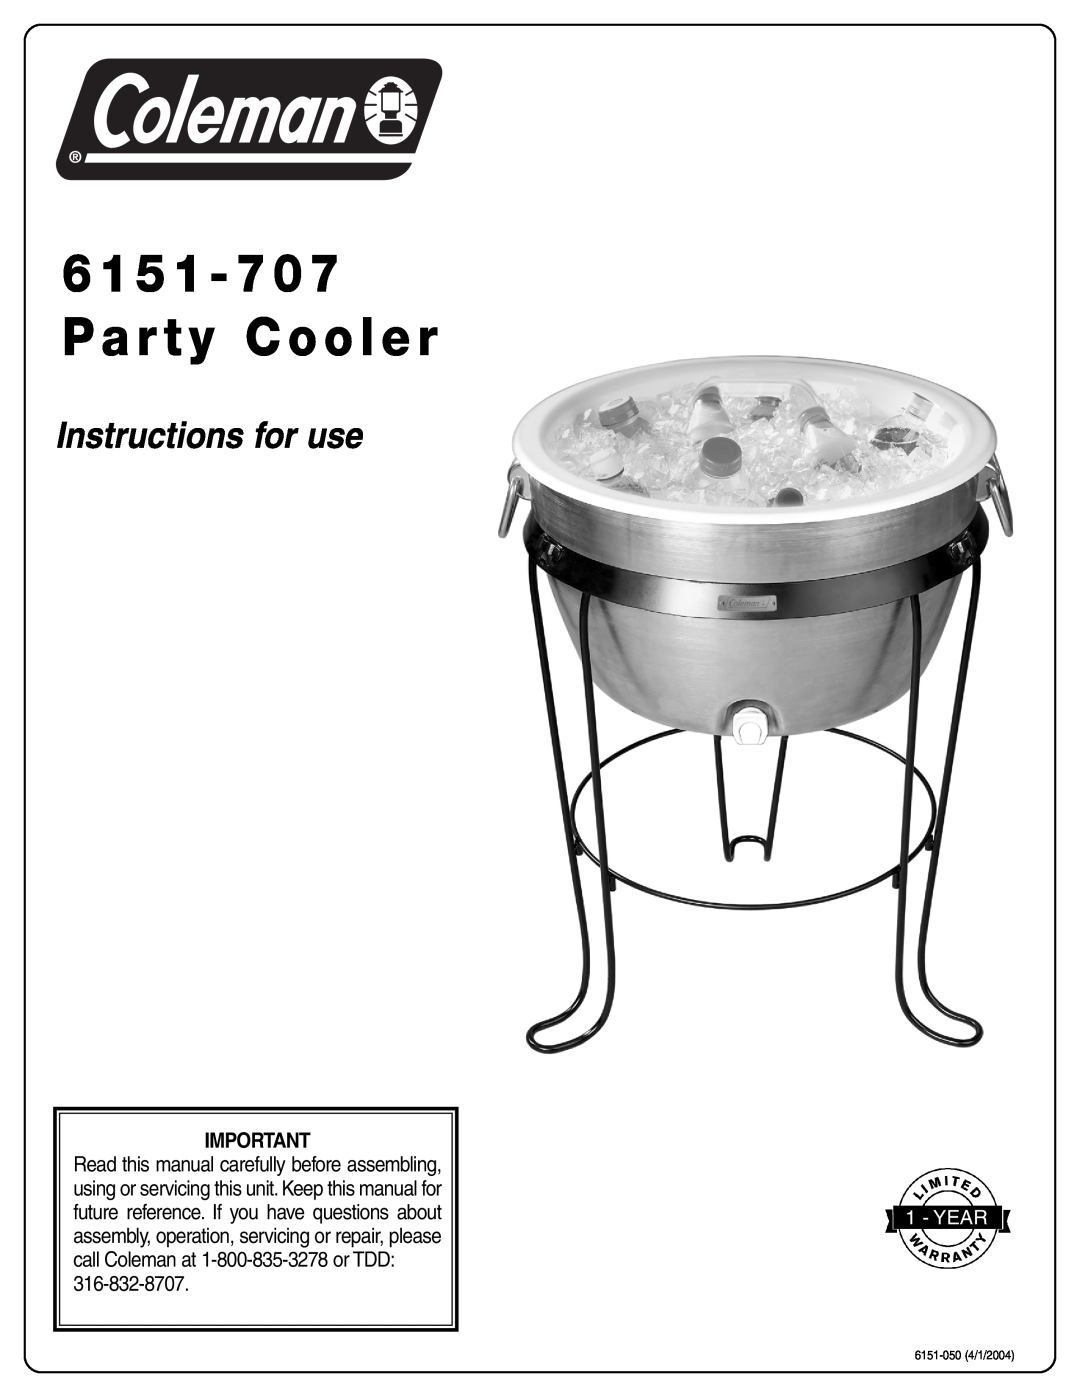 Coleman 6151-707 manual 6 1 5 1 - 7 0 7 Party Cooler, Instructions for use, Year, 6151-050 4/1/2004 